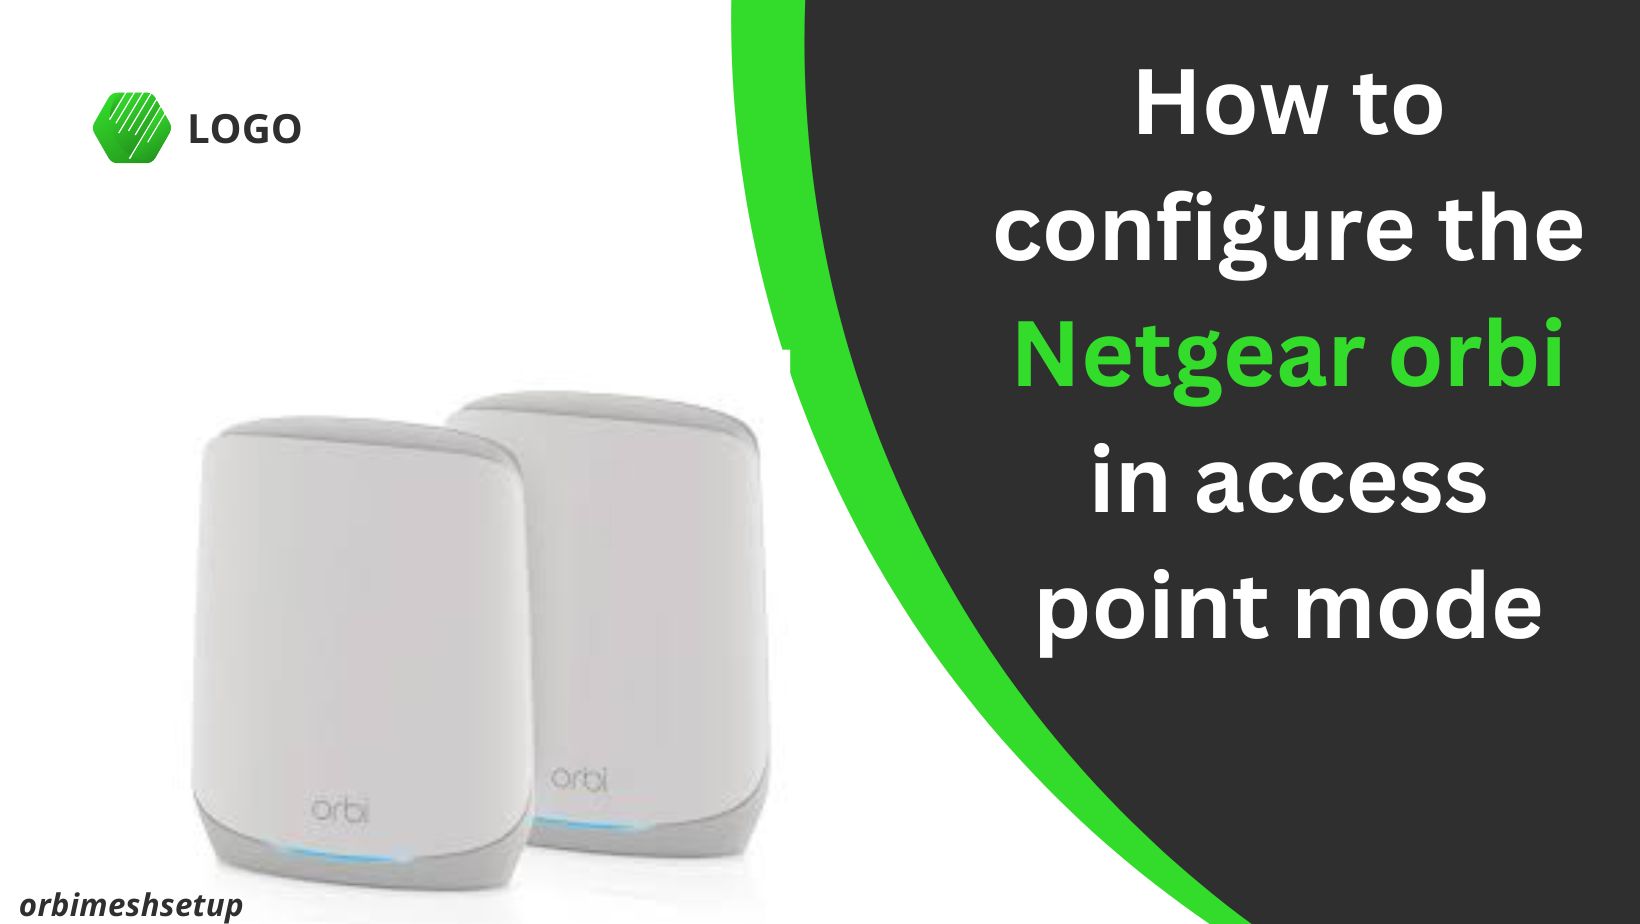 You are currently viewing How to configure the Netgear orbi in access point mode